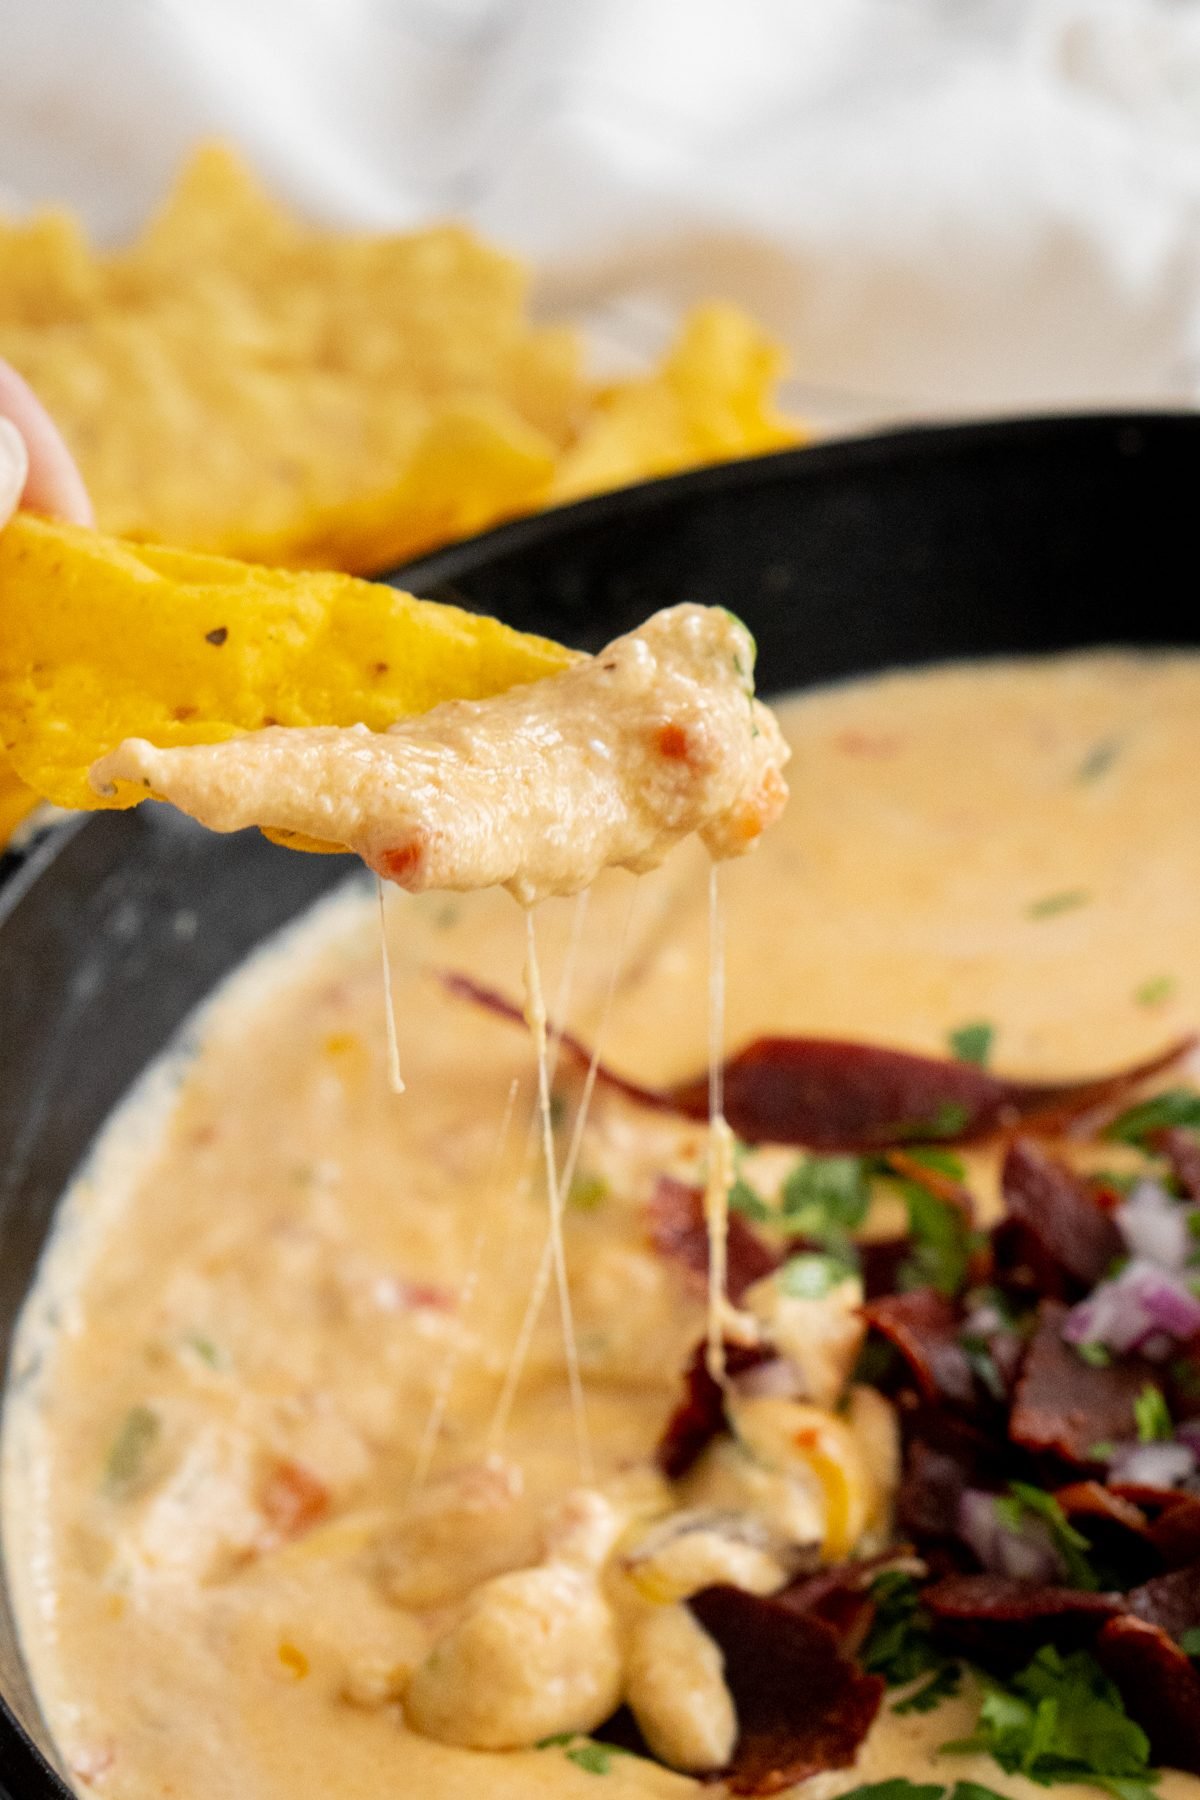 Chip scooping queso.